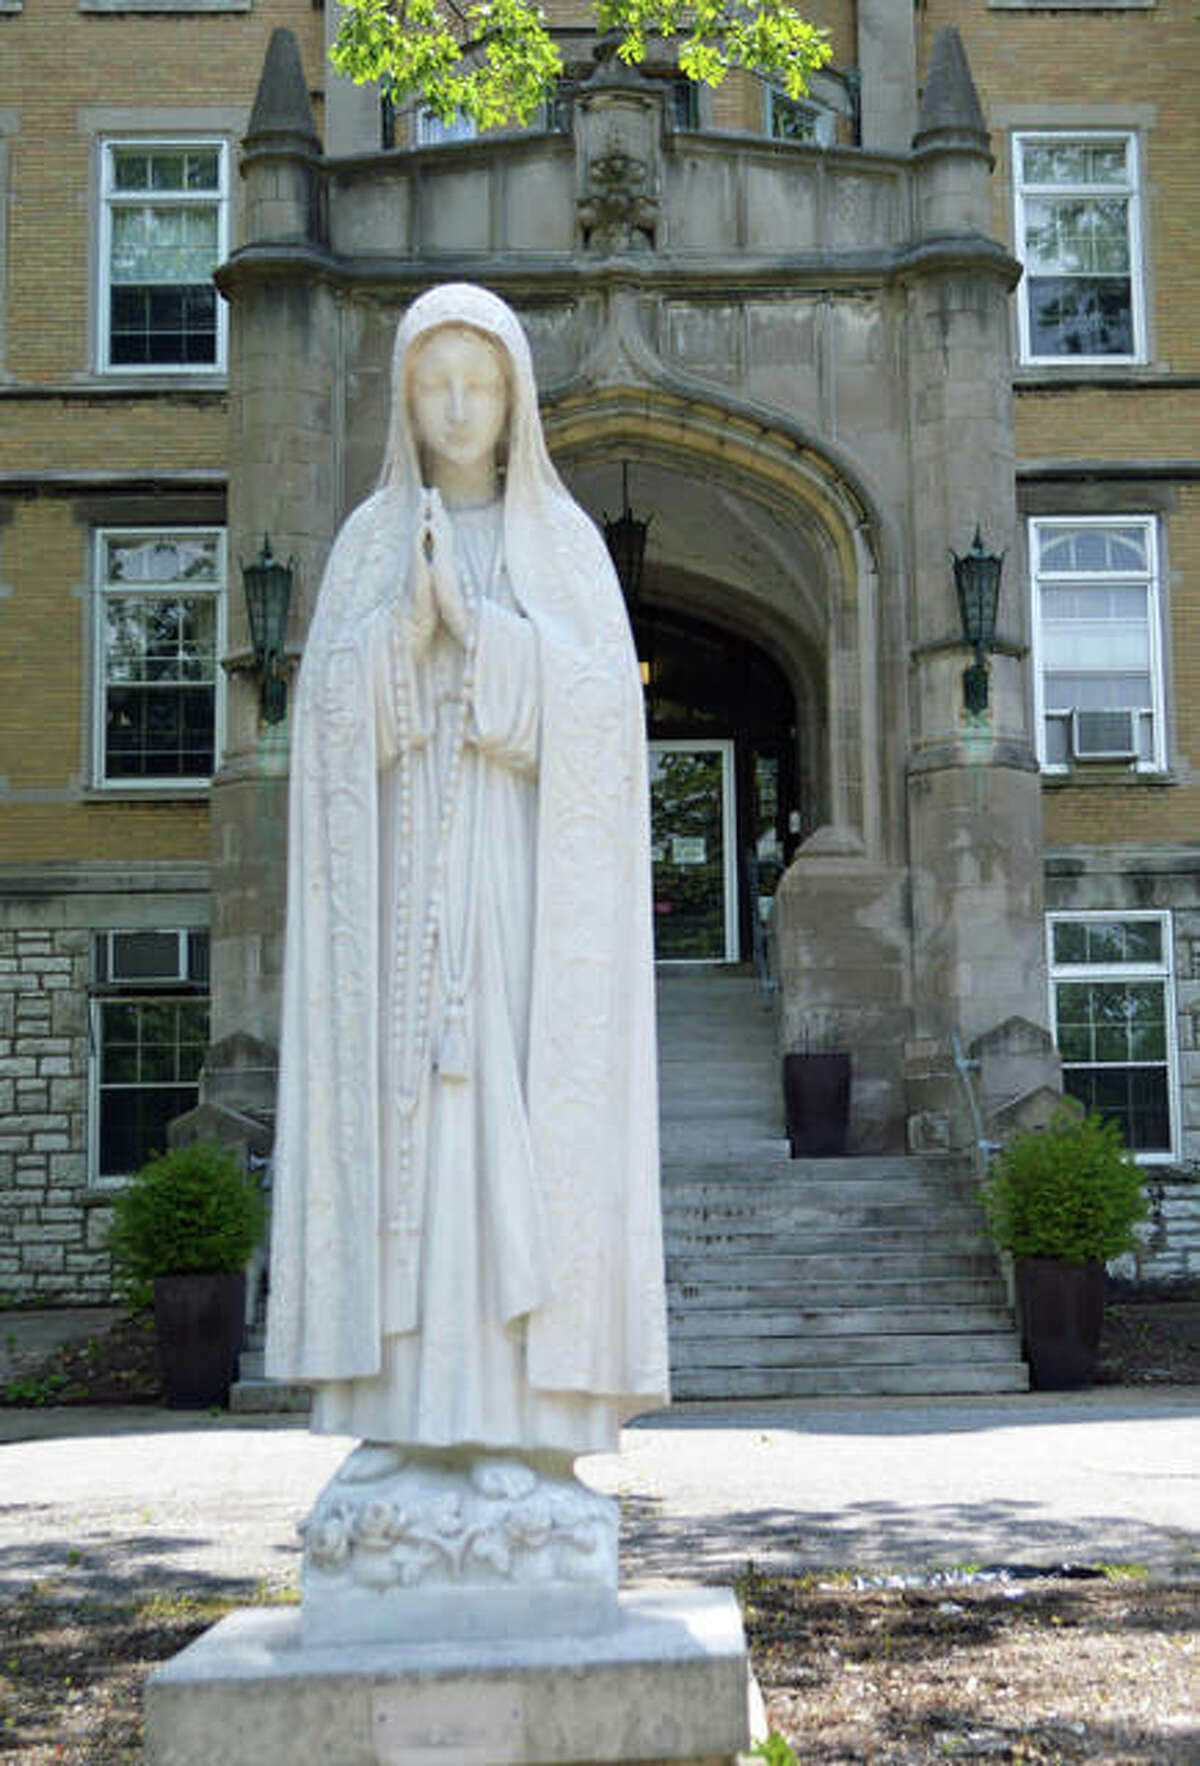 The Catholic Children’s Home was established in 1879 by the Precious Blood Sisters of Ruma, Illinois.